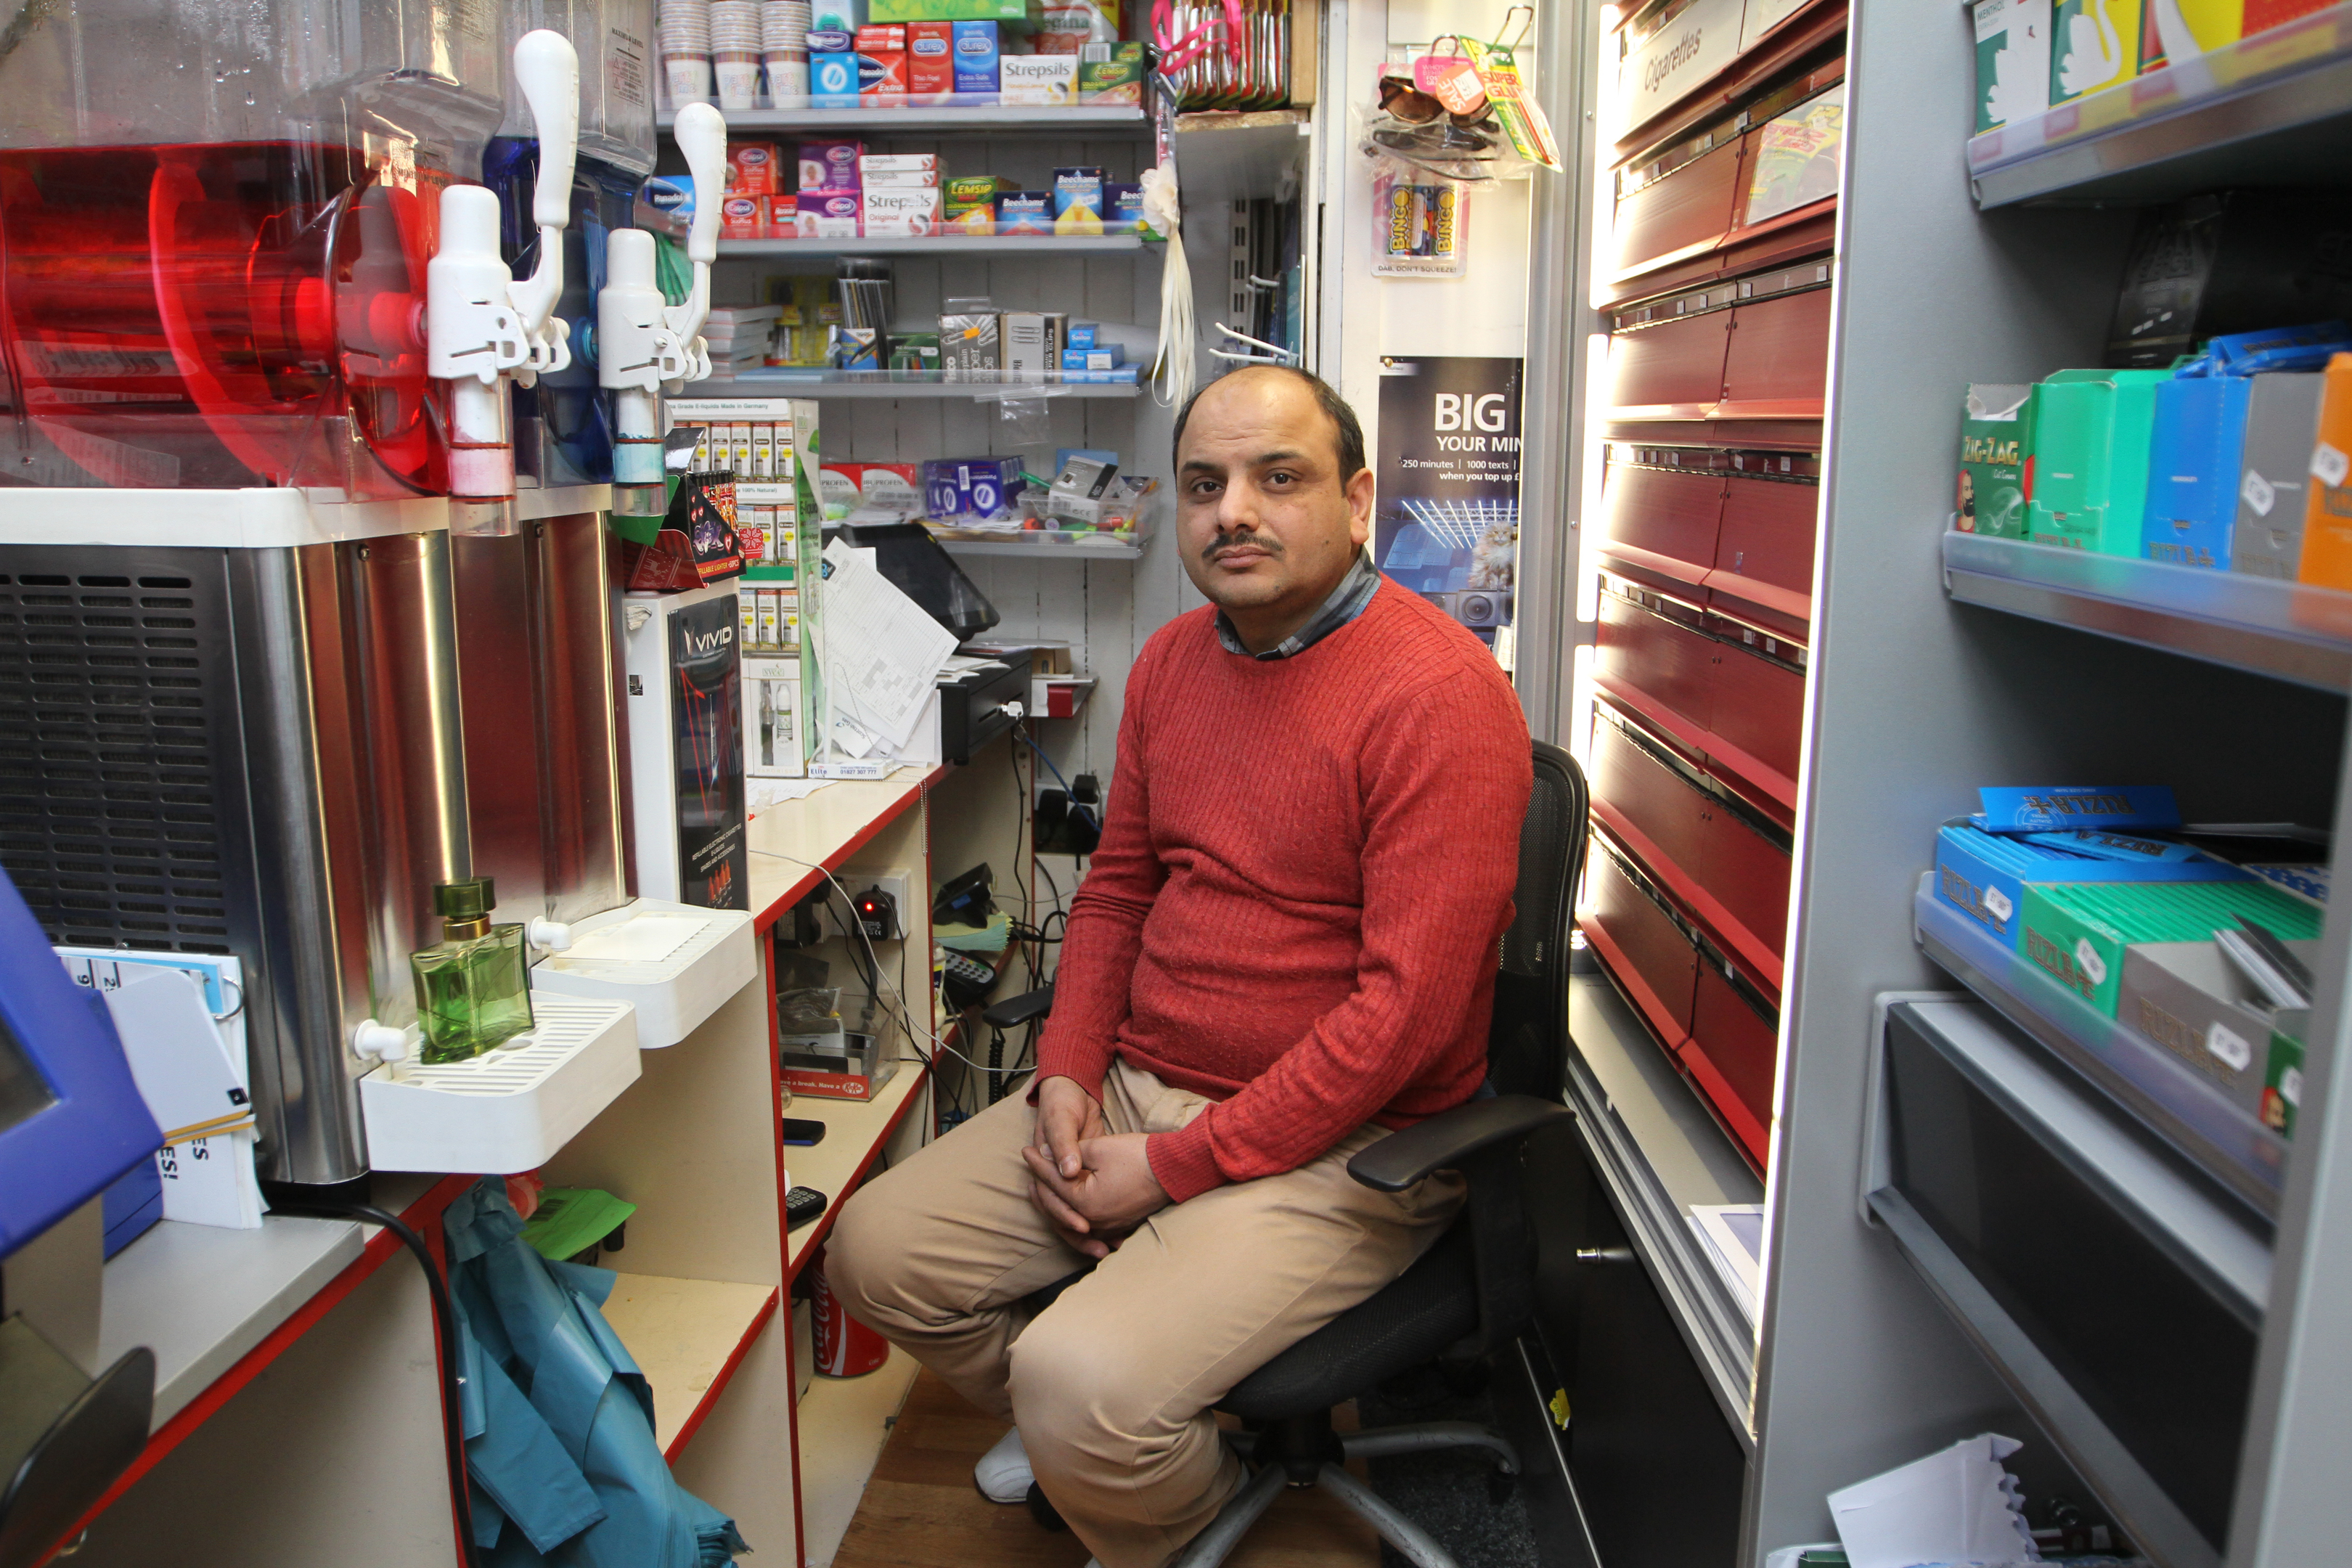 Hassan Majid at his shop on Strathmartine Road.